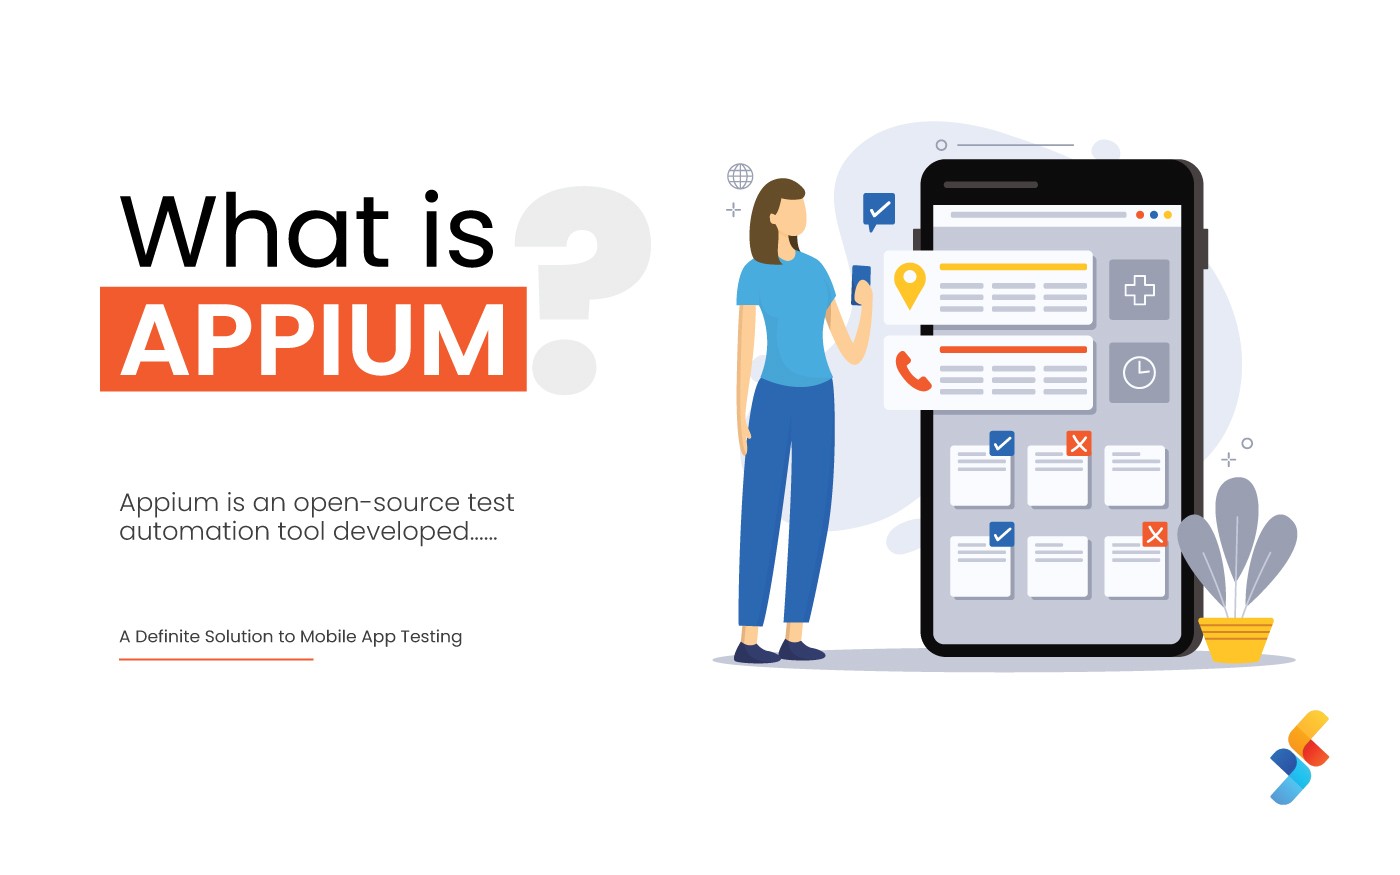 What is Appium?